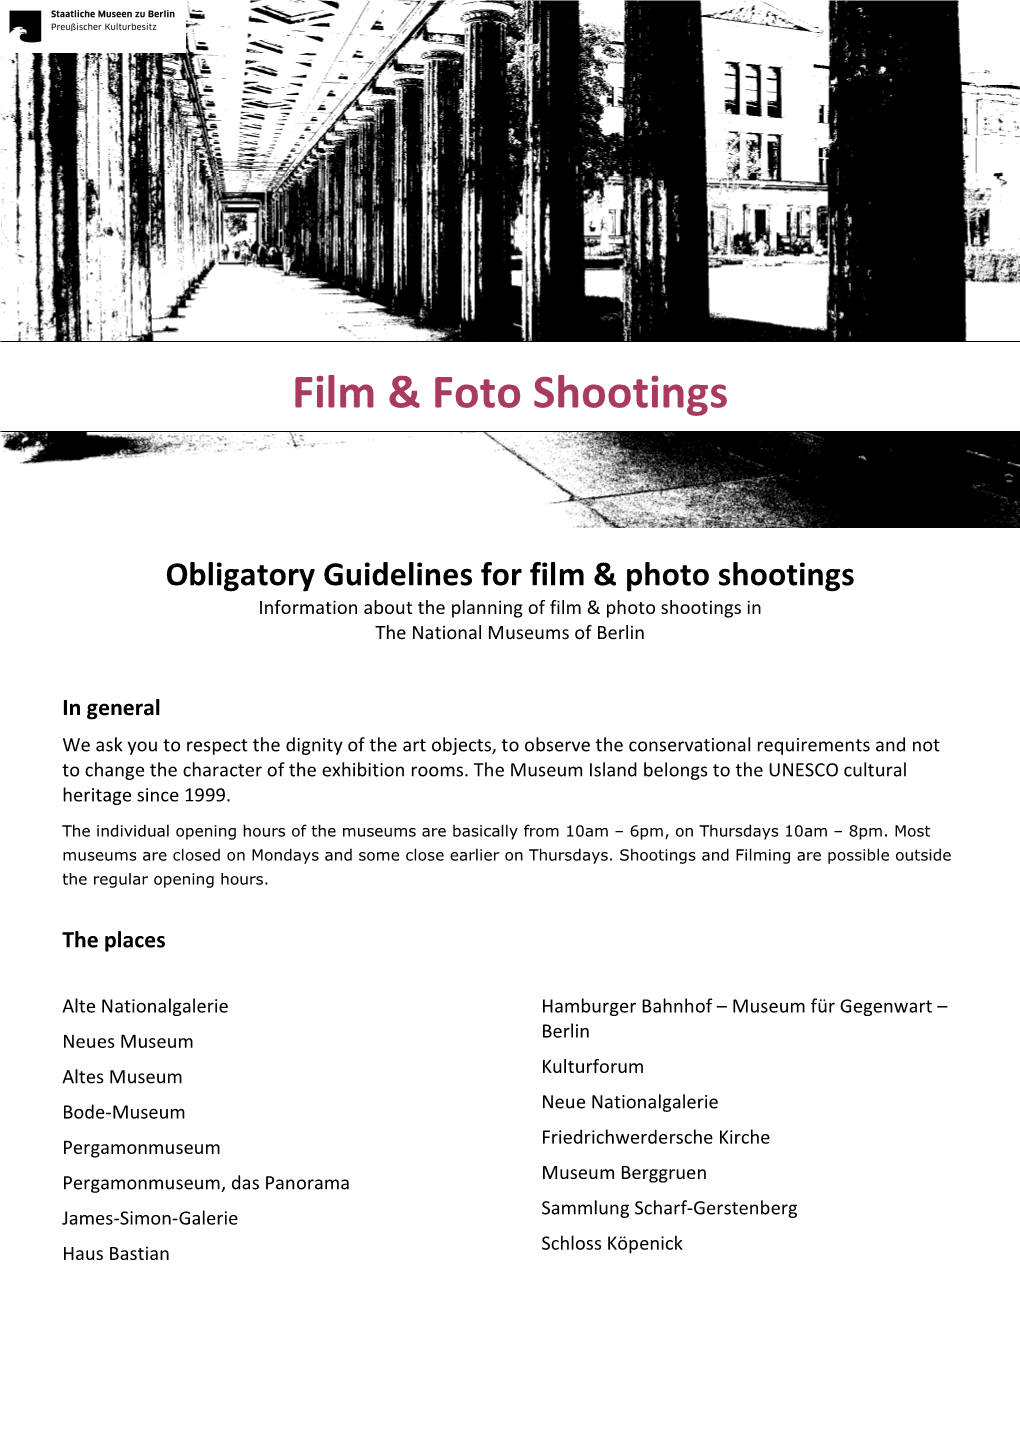 Obligatory Guidelines for Film & Photo Shootings